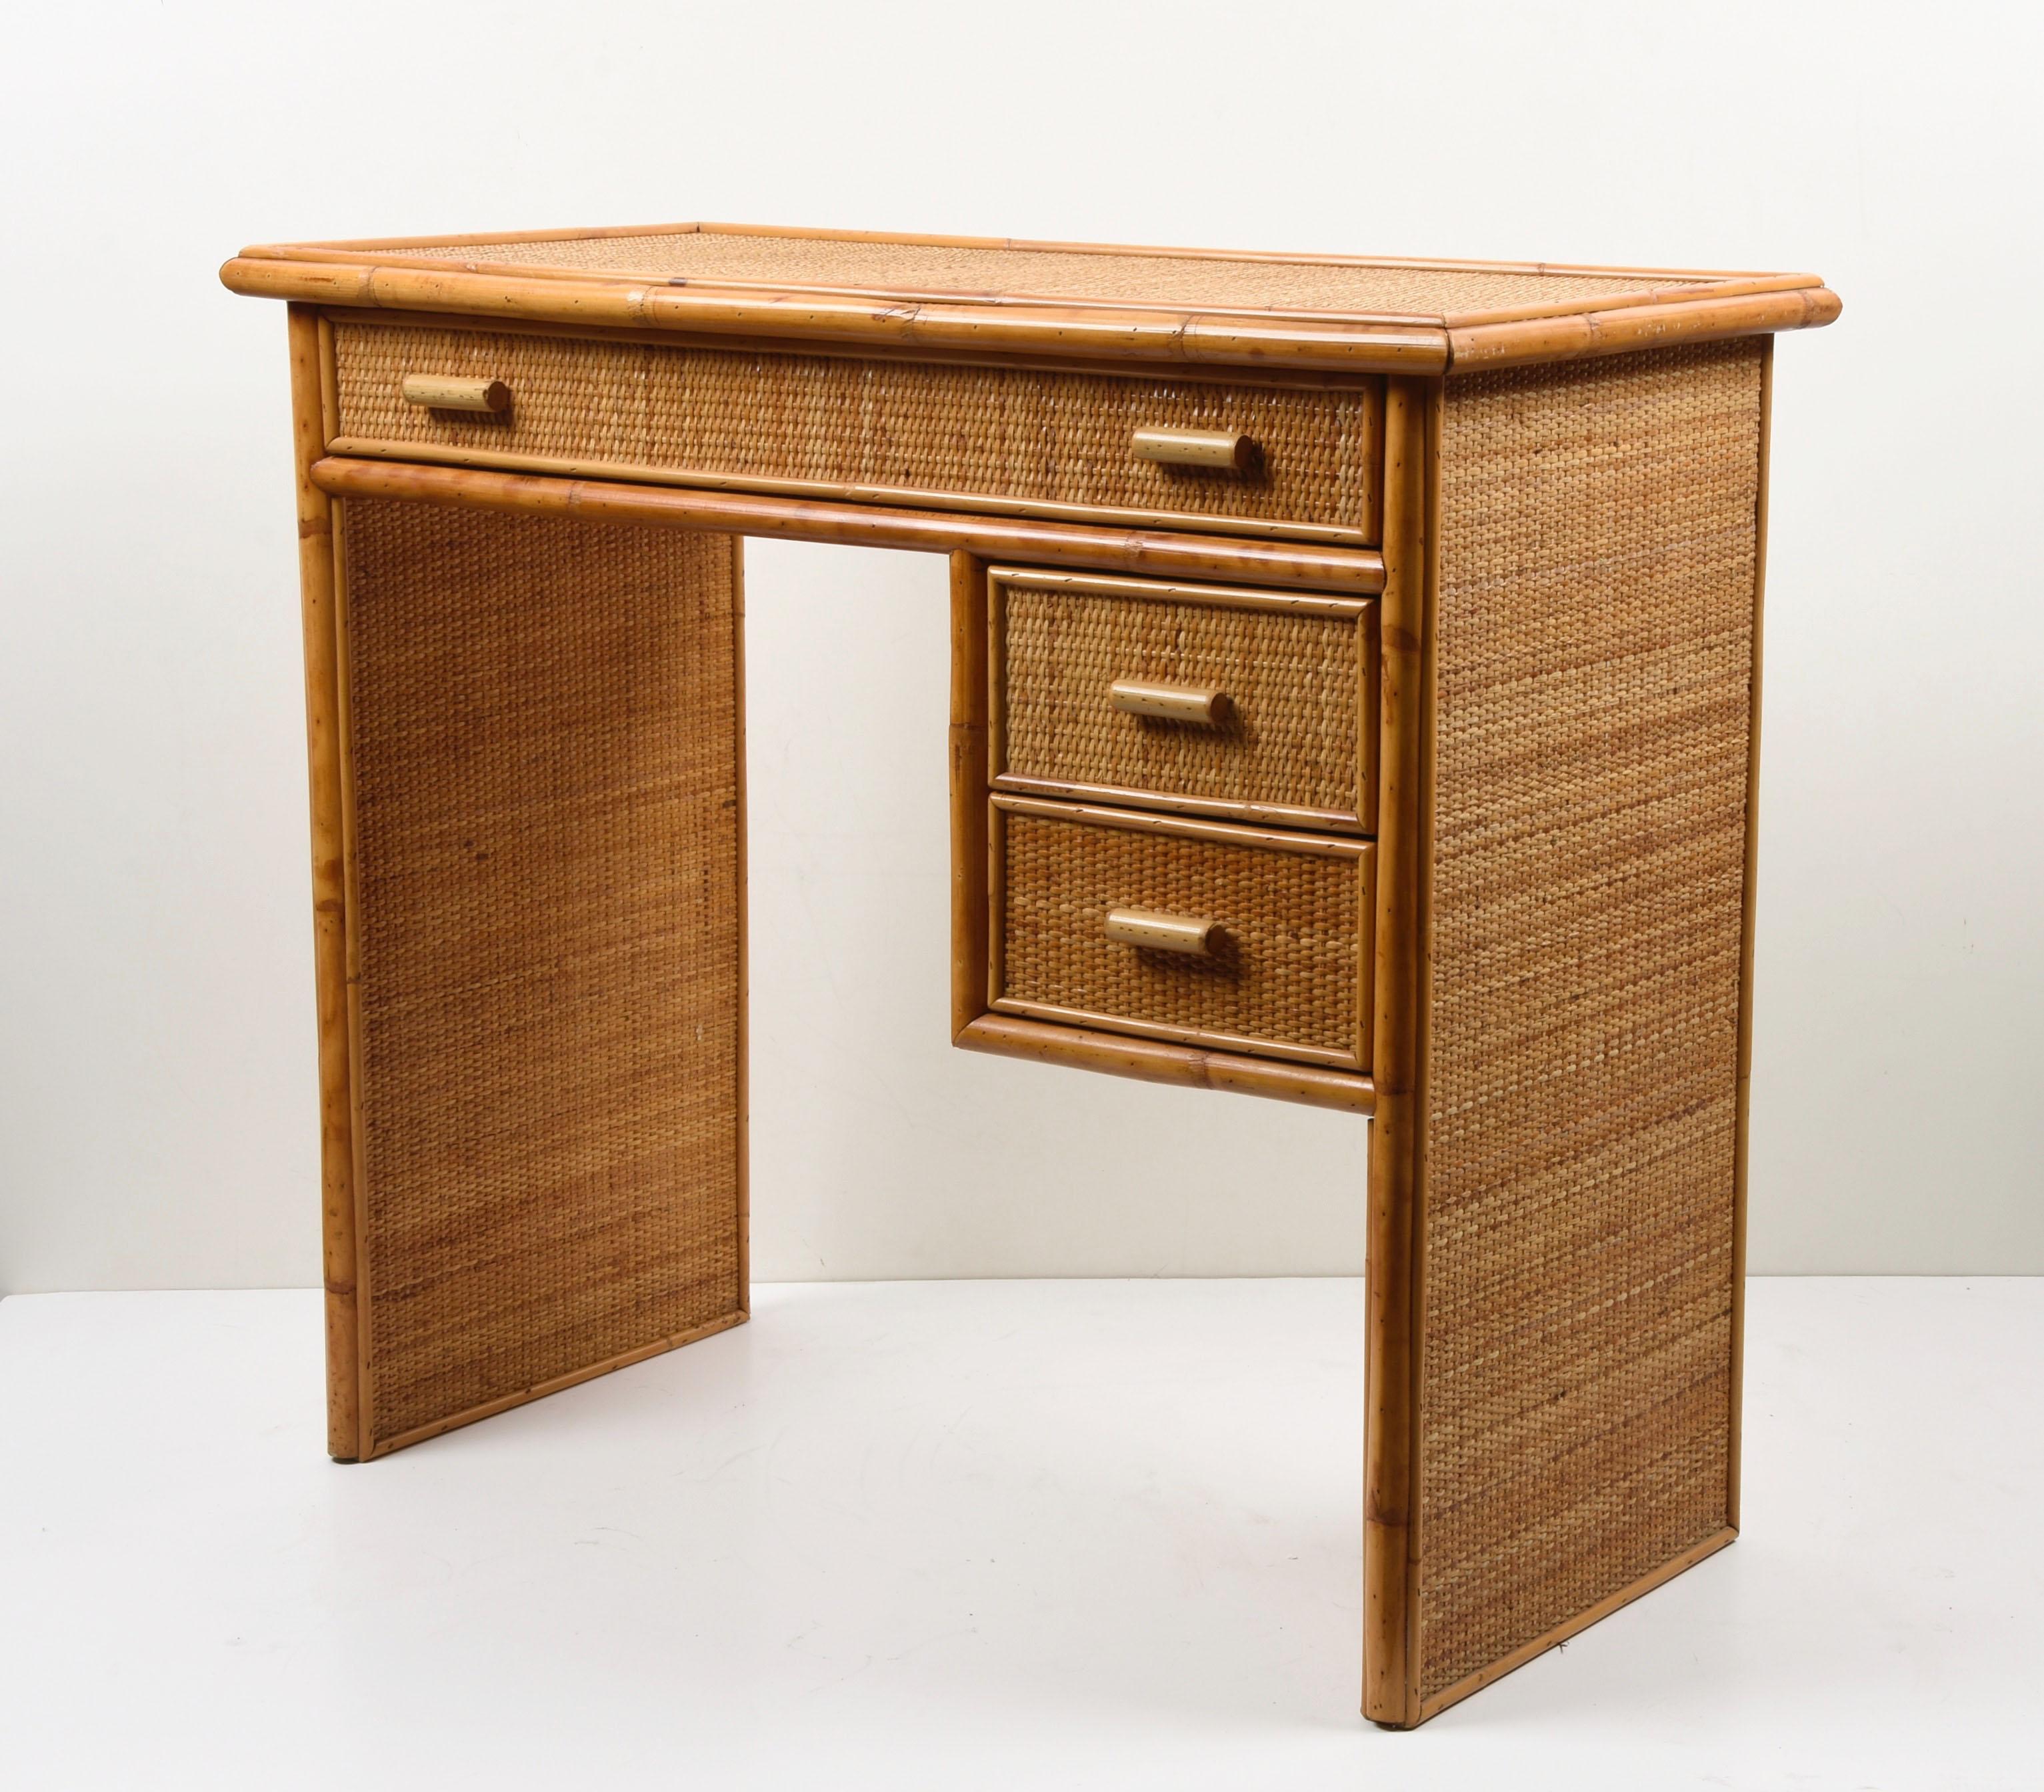 Amazing midcentury bamboo and wicker desk with drawers. This wonderful piece was designed in Italy during the 1980s.

This writing table is unique because of the materials used, bamboo and rattan, and it has three drawers, a large one and two